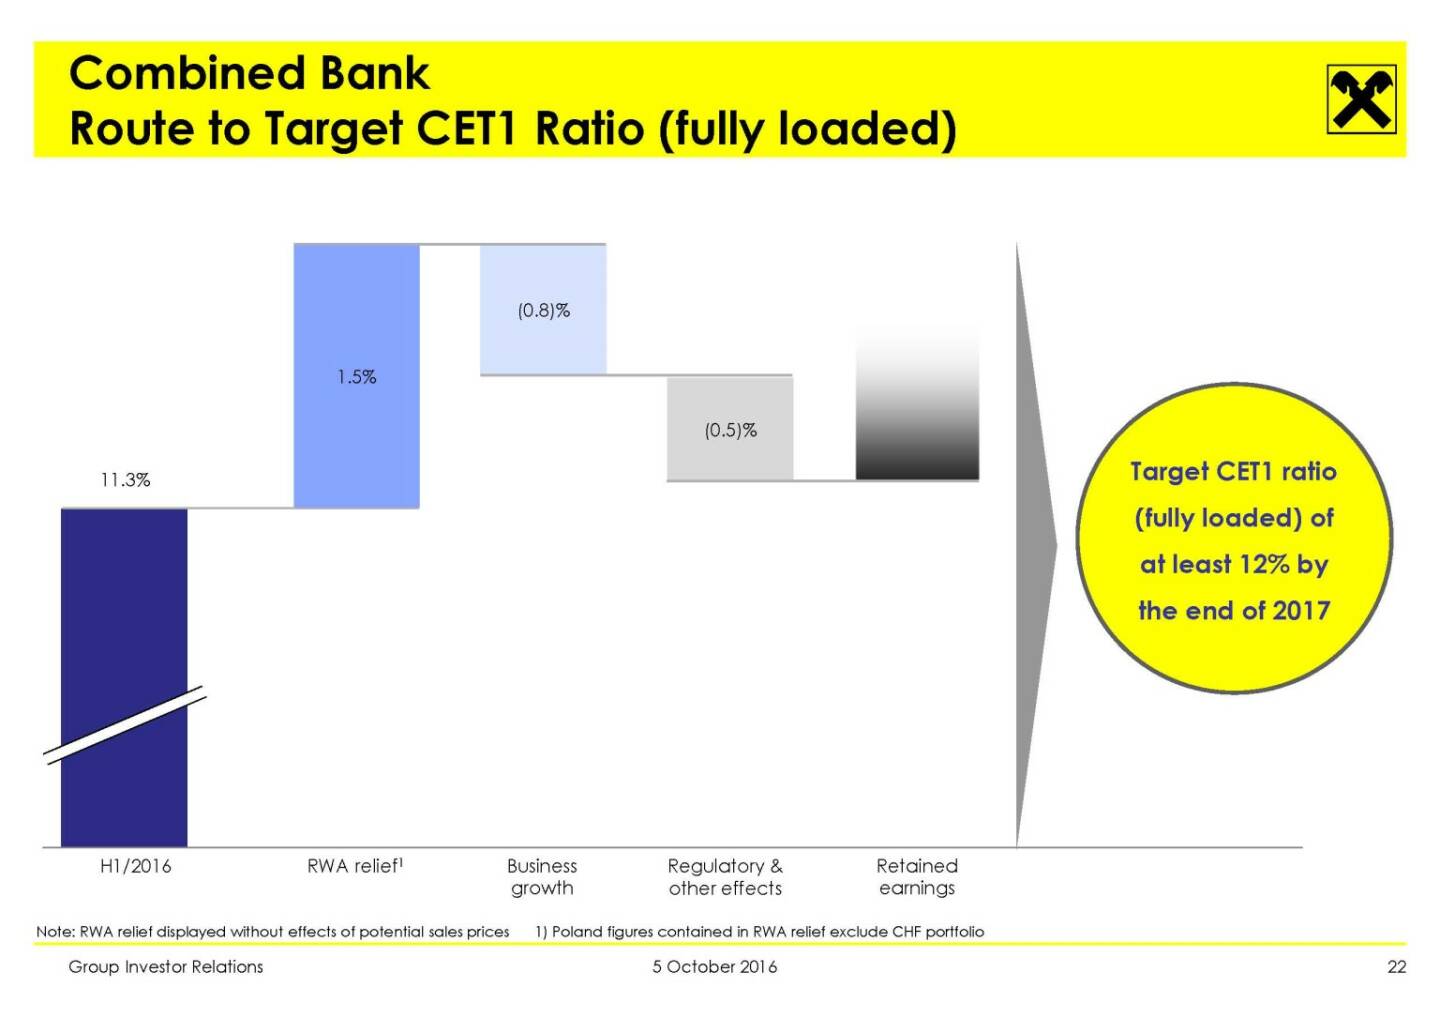 RBI - Combined Bank Route to Target CET1 Ratio (fully loaded)